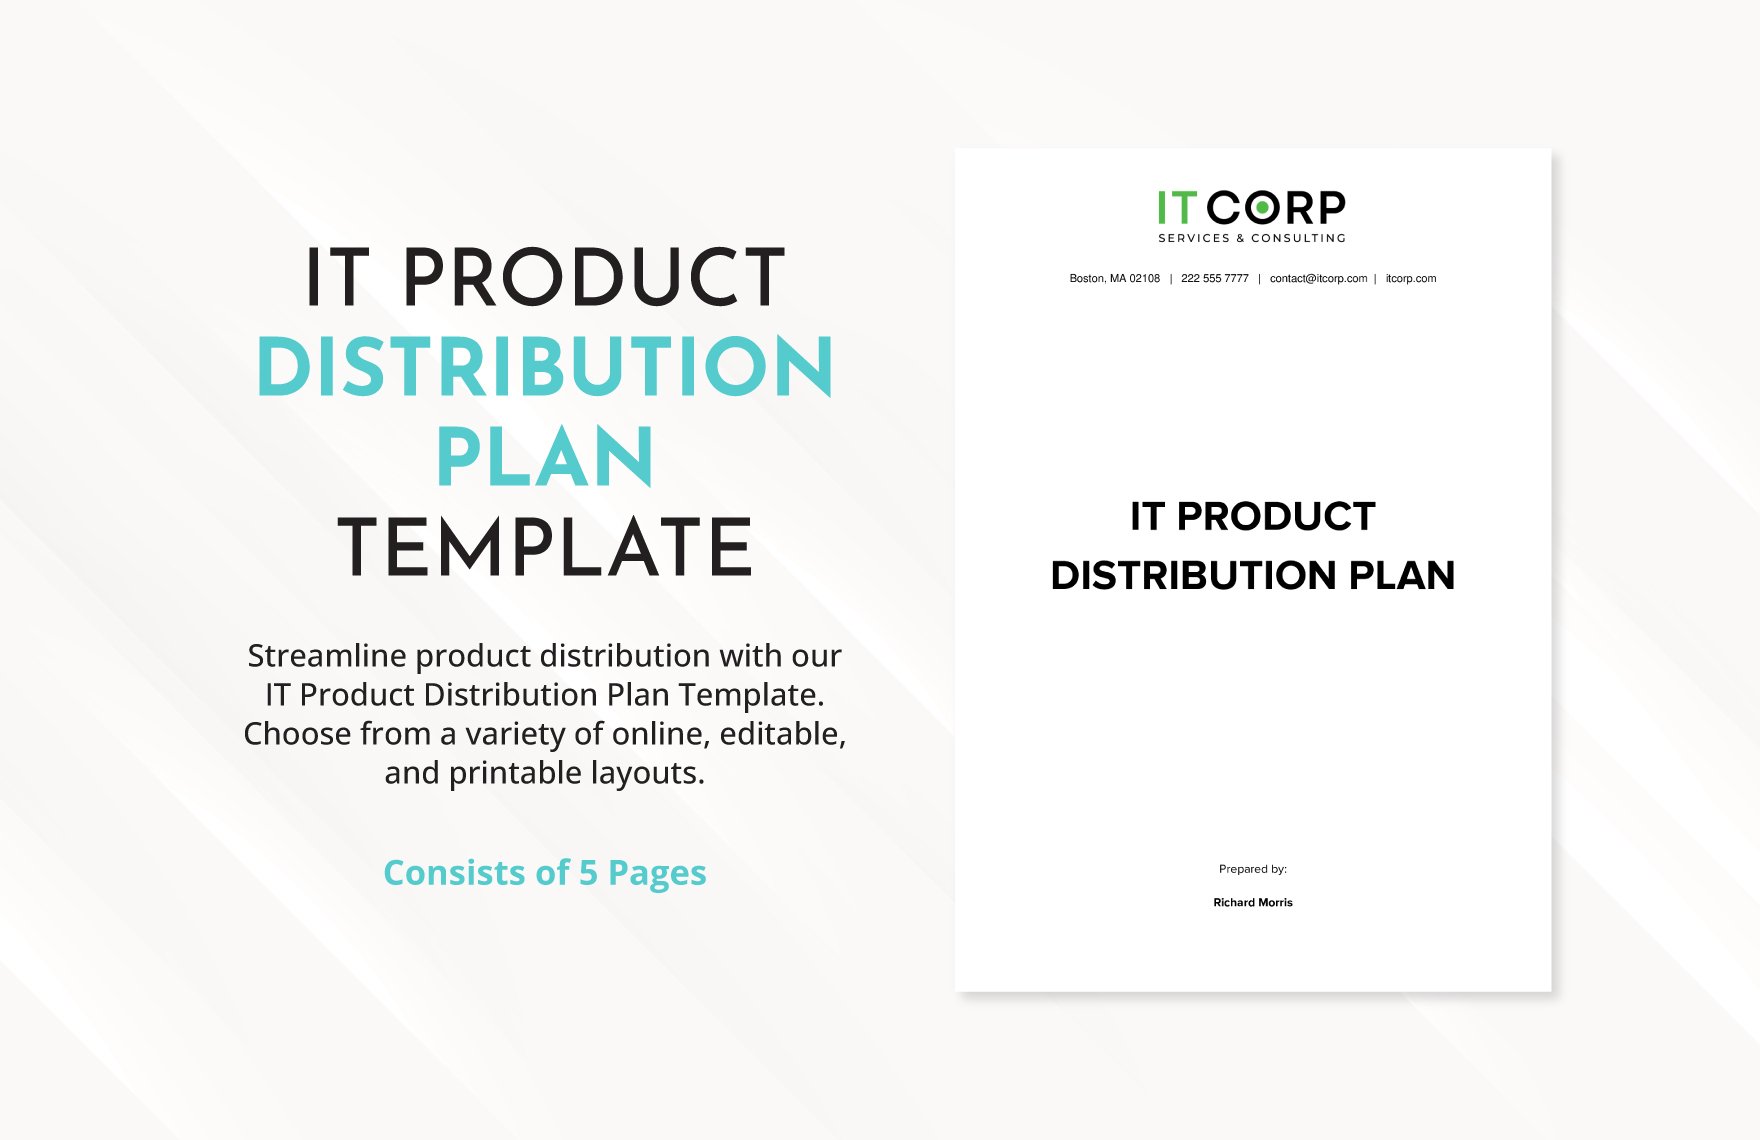 IT Product Distribution Plan Template in Word, Google Docs, PDF